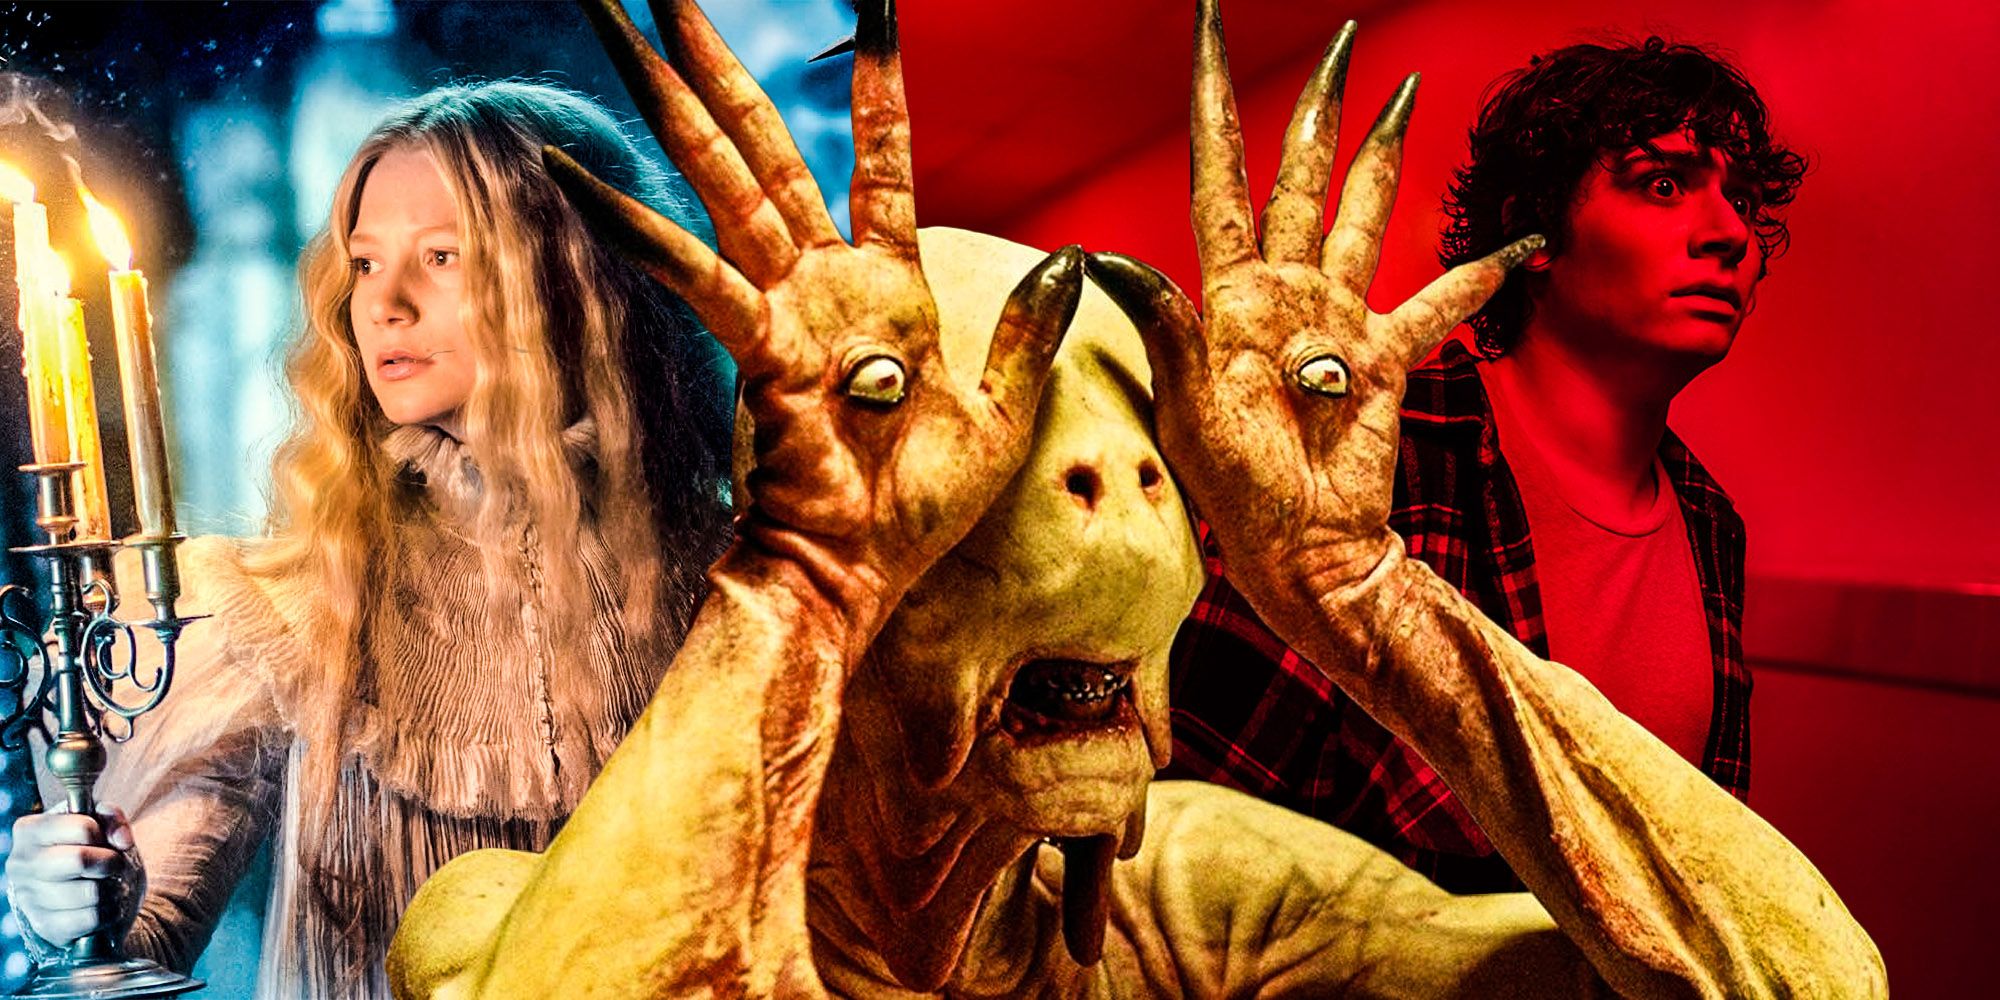 Every Guillermo Del Toro Horror Movie Ranked From Worst To Best